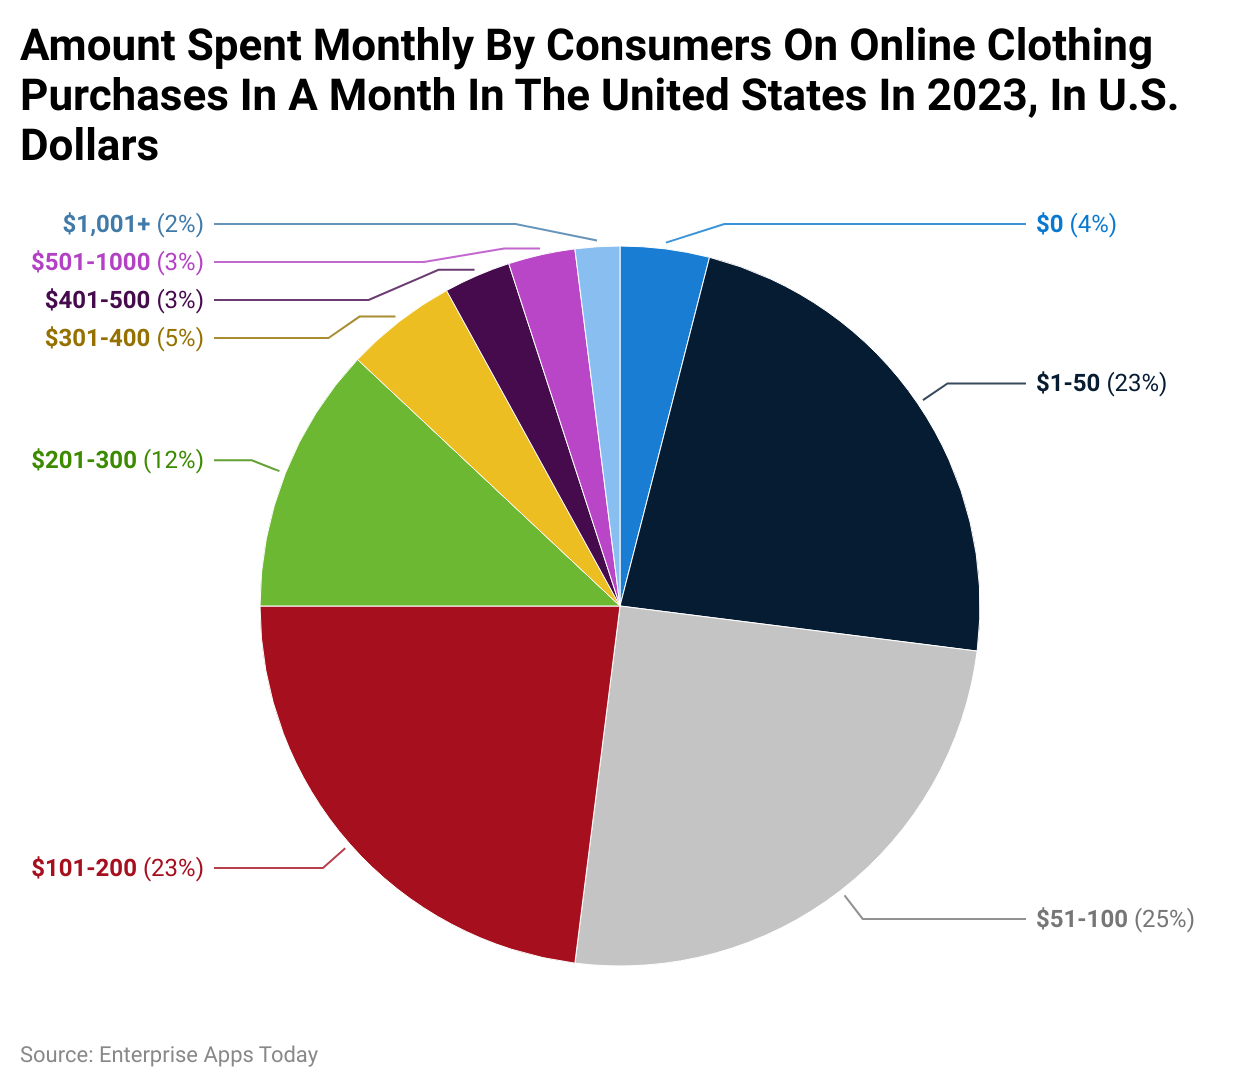 Amount spent monthly by consumers on online clothing purchases in a month in the United States in 2023, in U.S. dollars